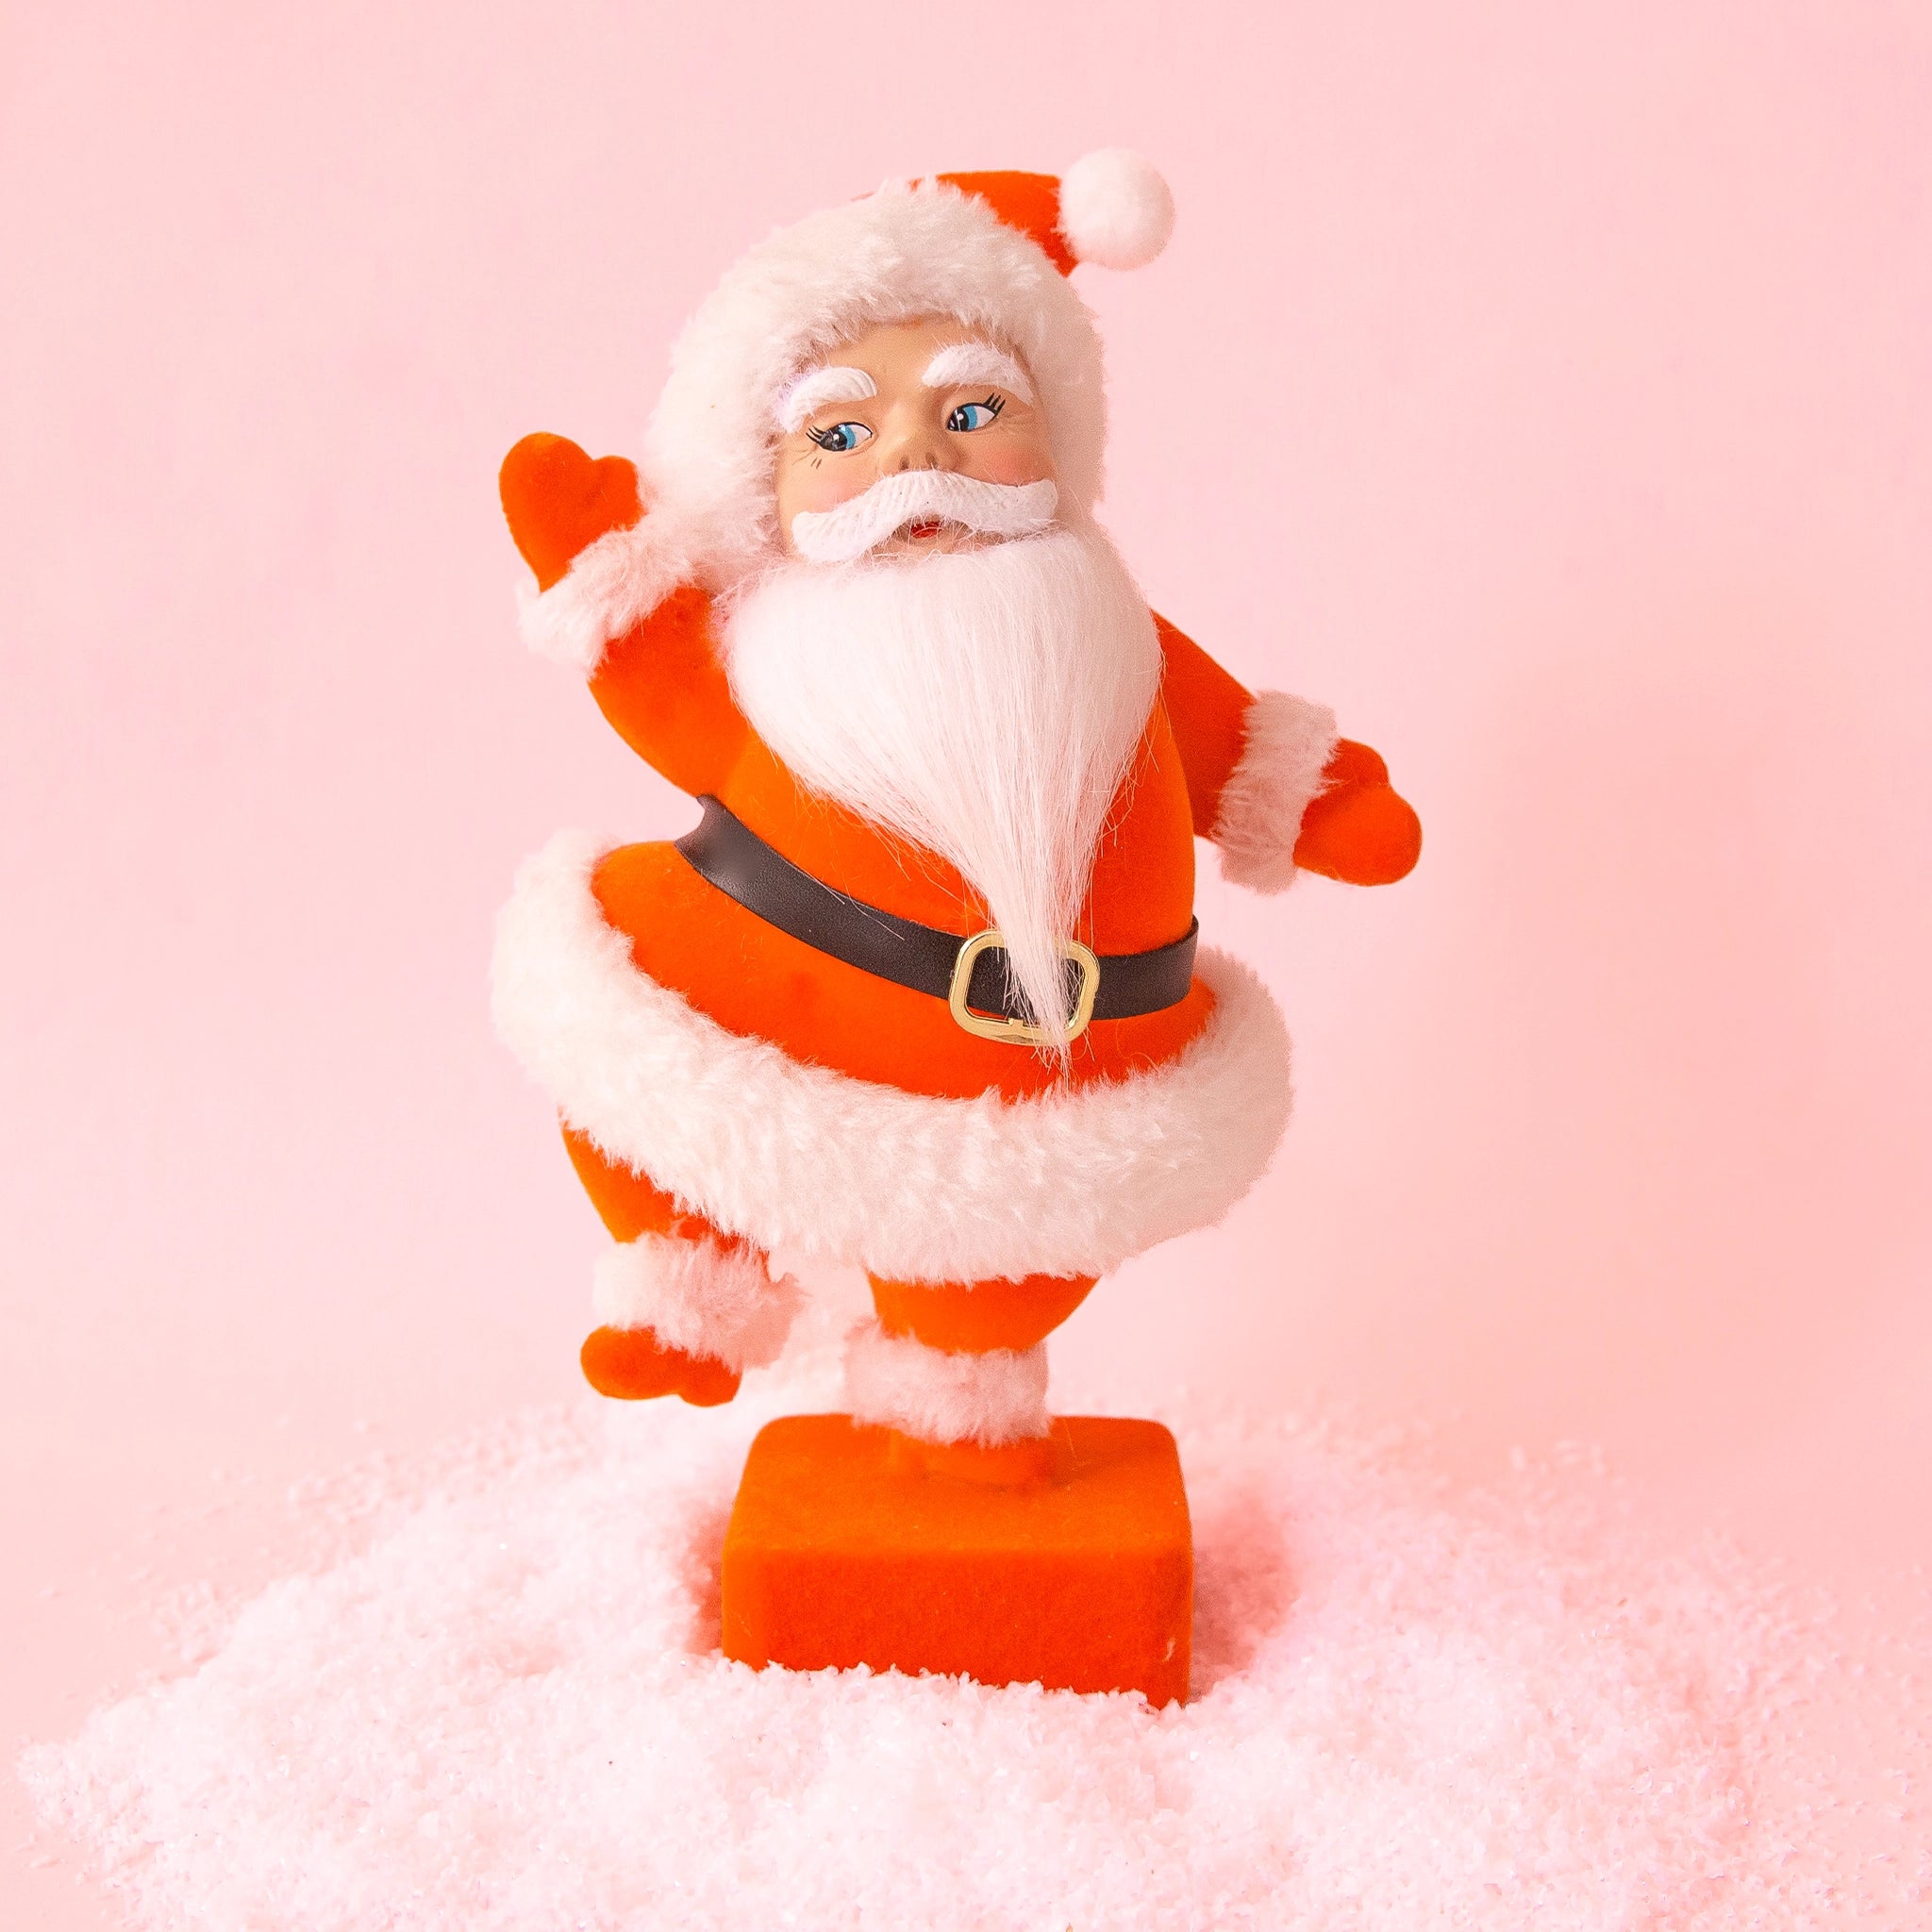 On a peachy background is a red flocked dancing Santa figurine. 